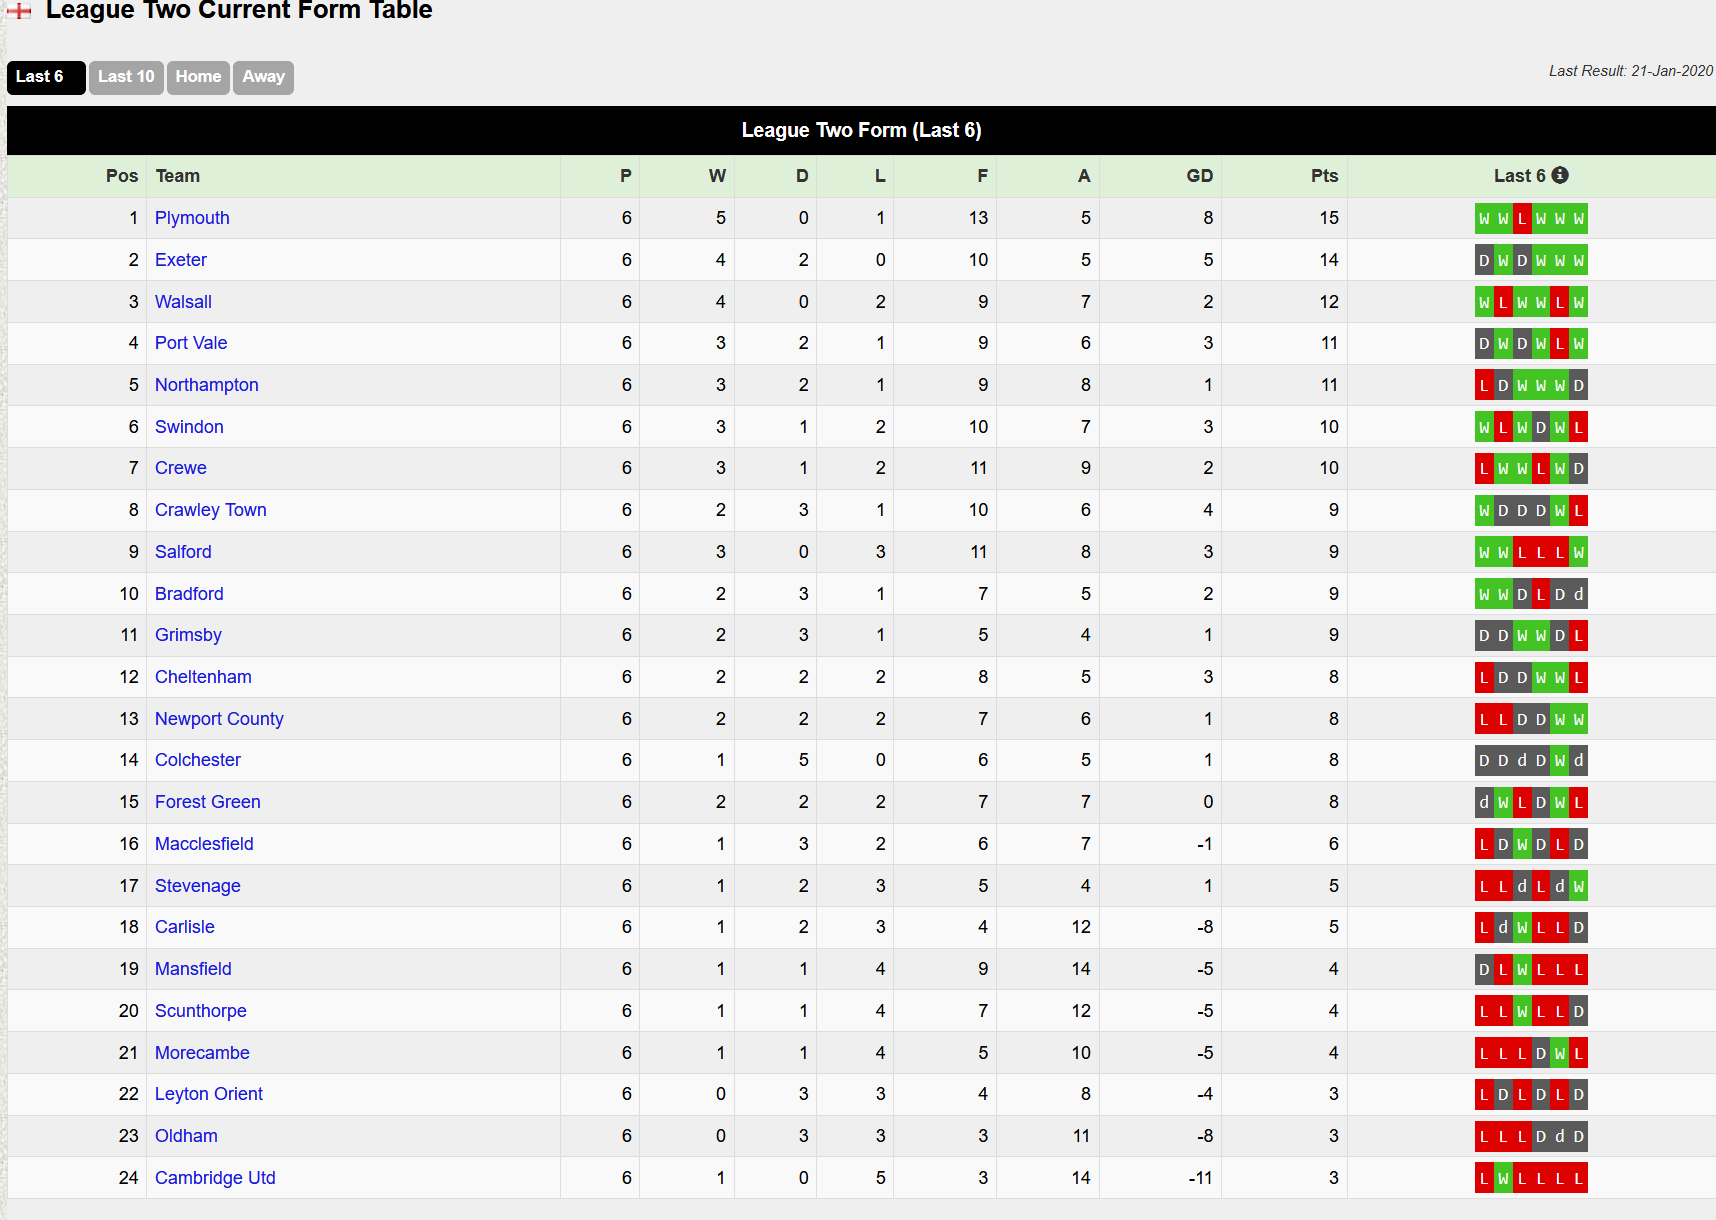 Last 6 Current Form Table All About Walsall Upthesaddlers